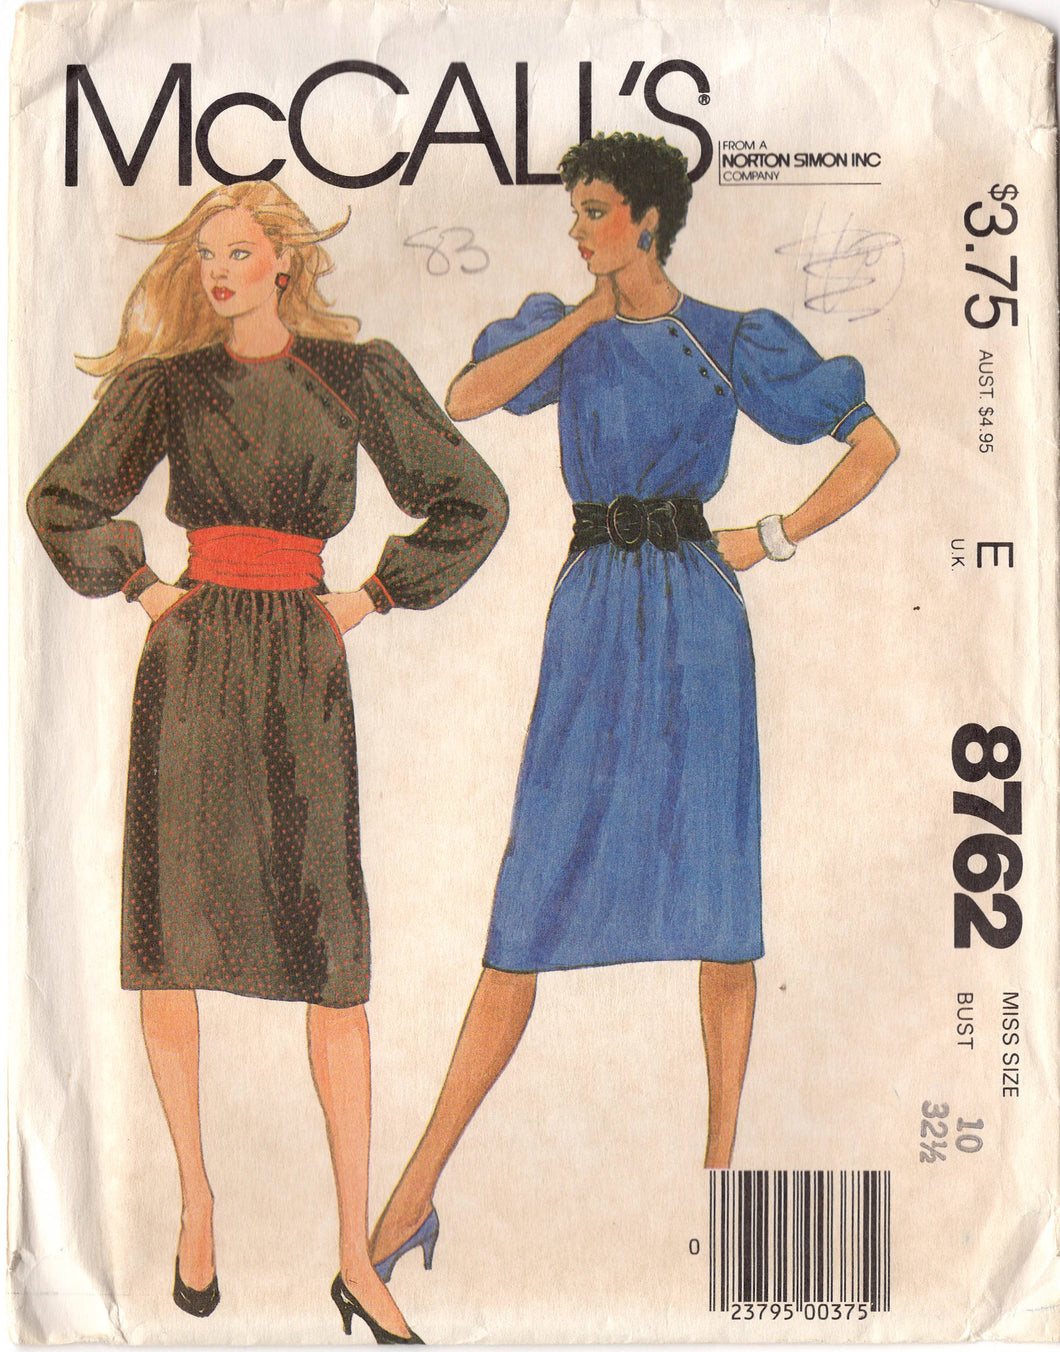 1980's McCall's Sheath Dress with Side Button Bodice closure and Puff Sleeves and Pockets - Bust 32.5